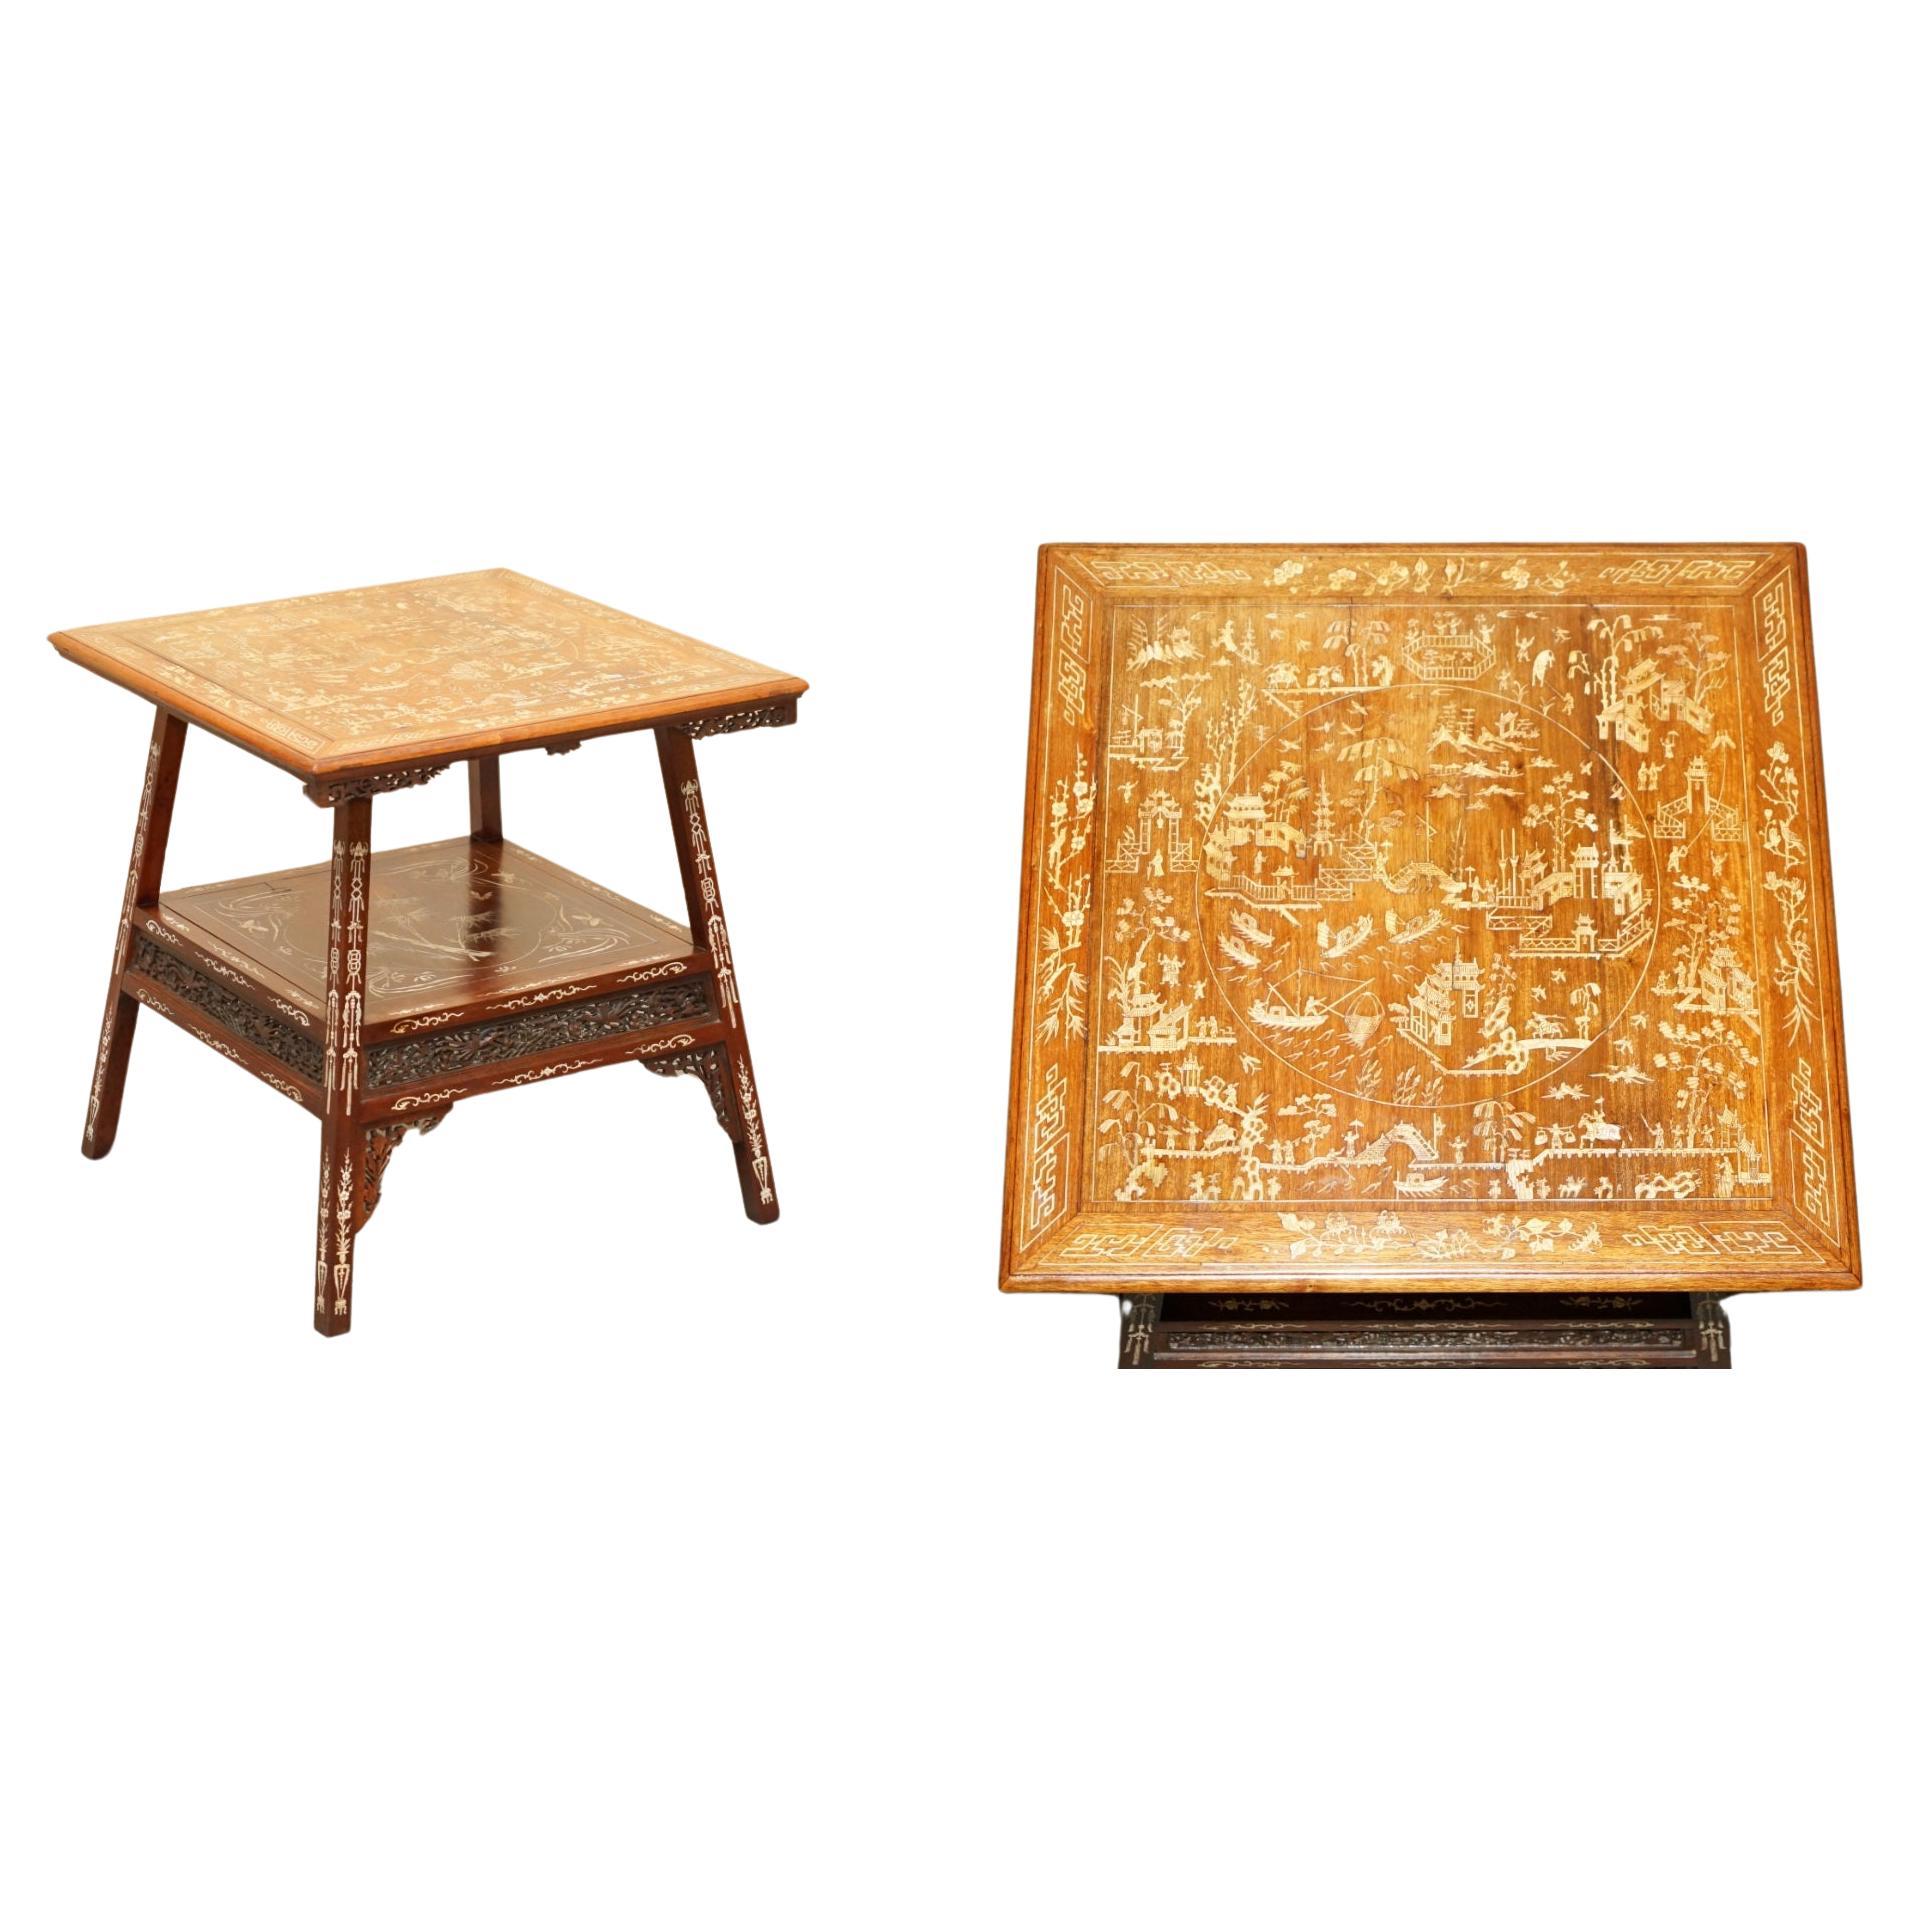 ANTIQUE CIRCA 1900 ORNATELY CARVED AND HEAViLY INLAID CHINESE OCCASIONAL TABLE For Sale